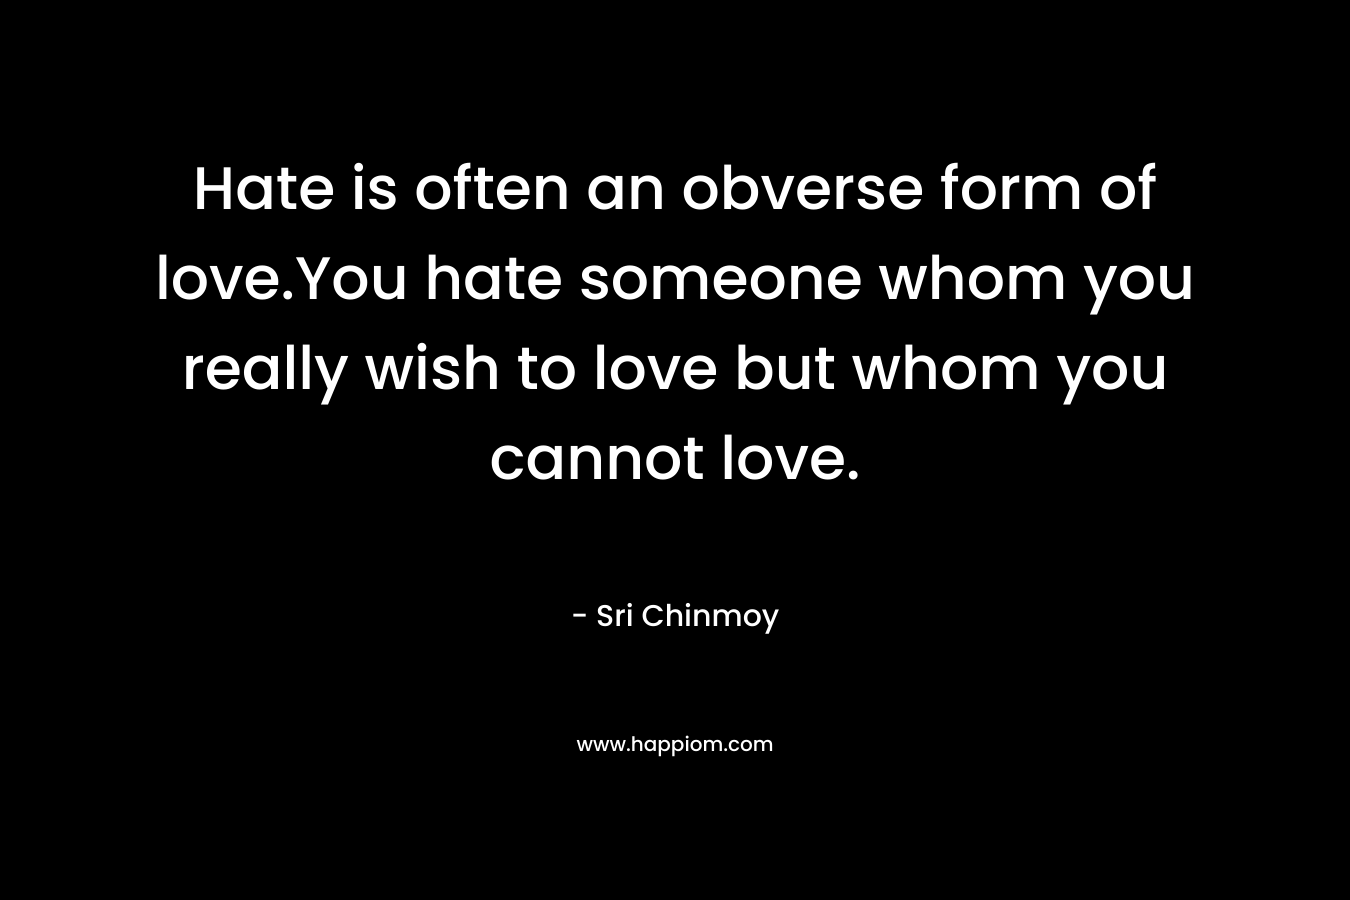 Hate is often an obverse form of love.You hate someone whom you really wish to love but whom you cannot love.